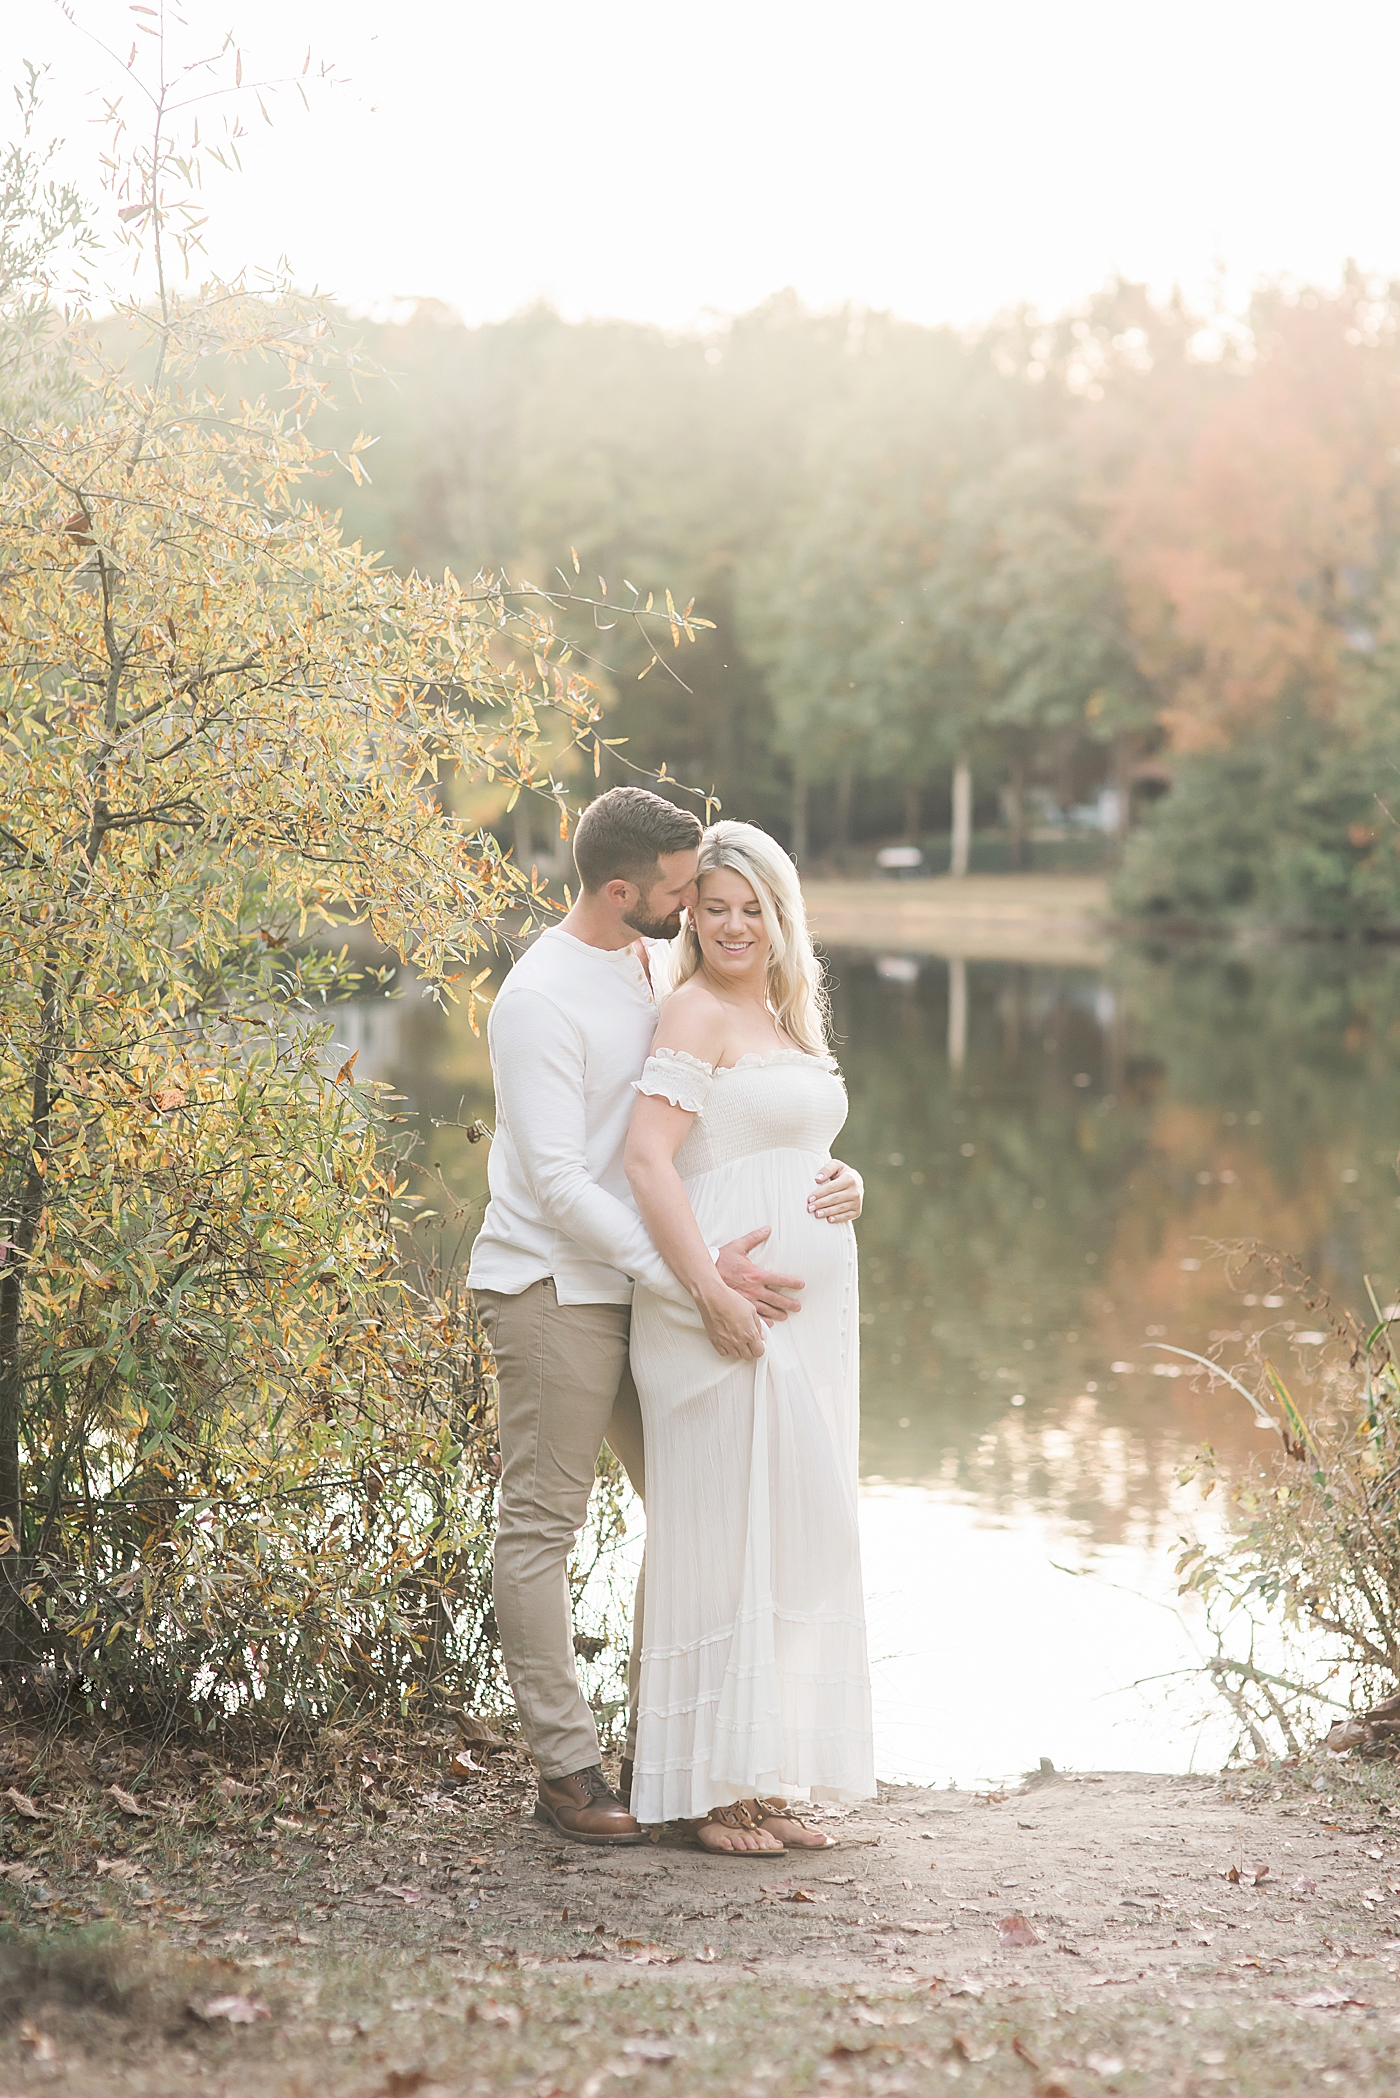 Mom and dad to be by a pond | Photo by Charlotte Maternity Photographer Anna Wisjo 